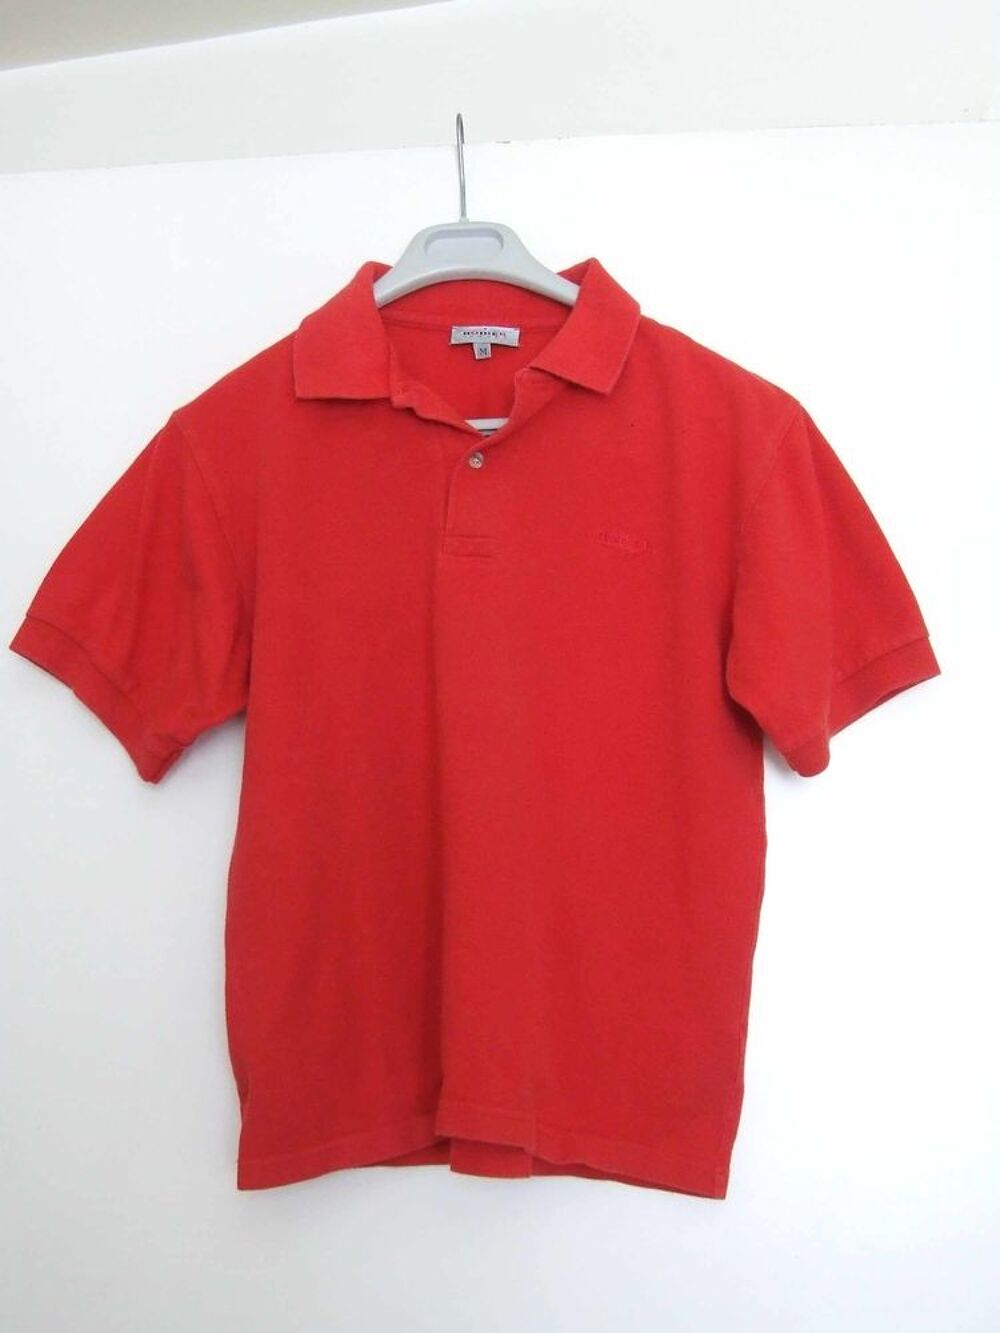 Polo manches courtes, RODIER, Rouge, Taille M, TBE Vtements